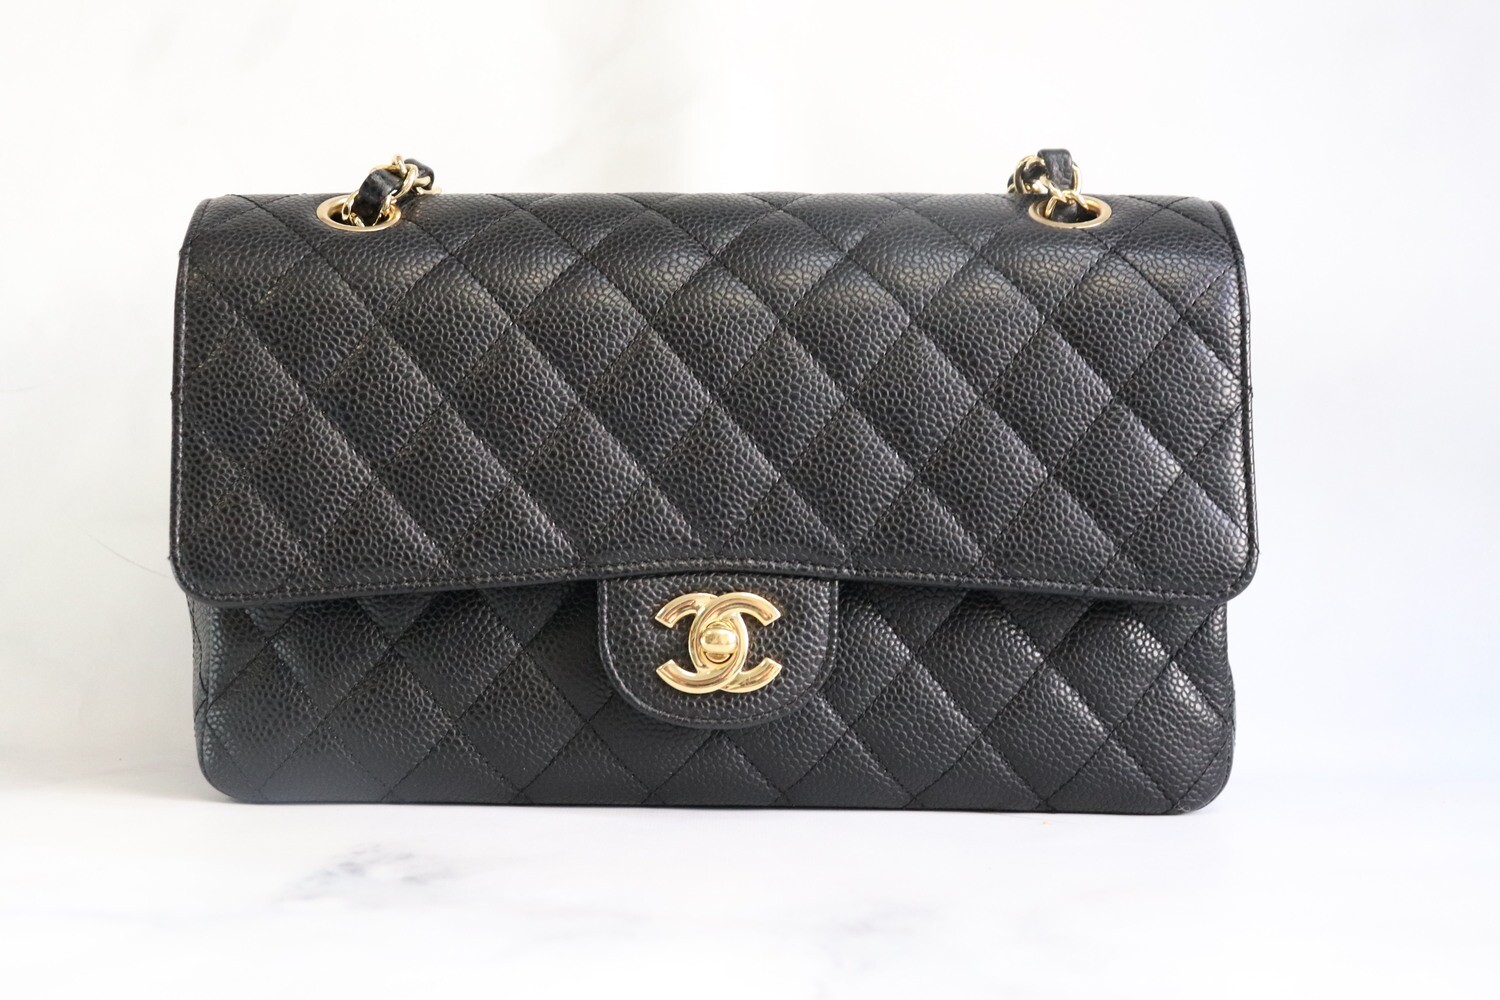 Chanel Classic Medium Double Flap, Black Caviar Leather, Gold Hardware,  Preowned in Box